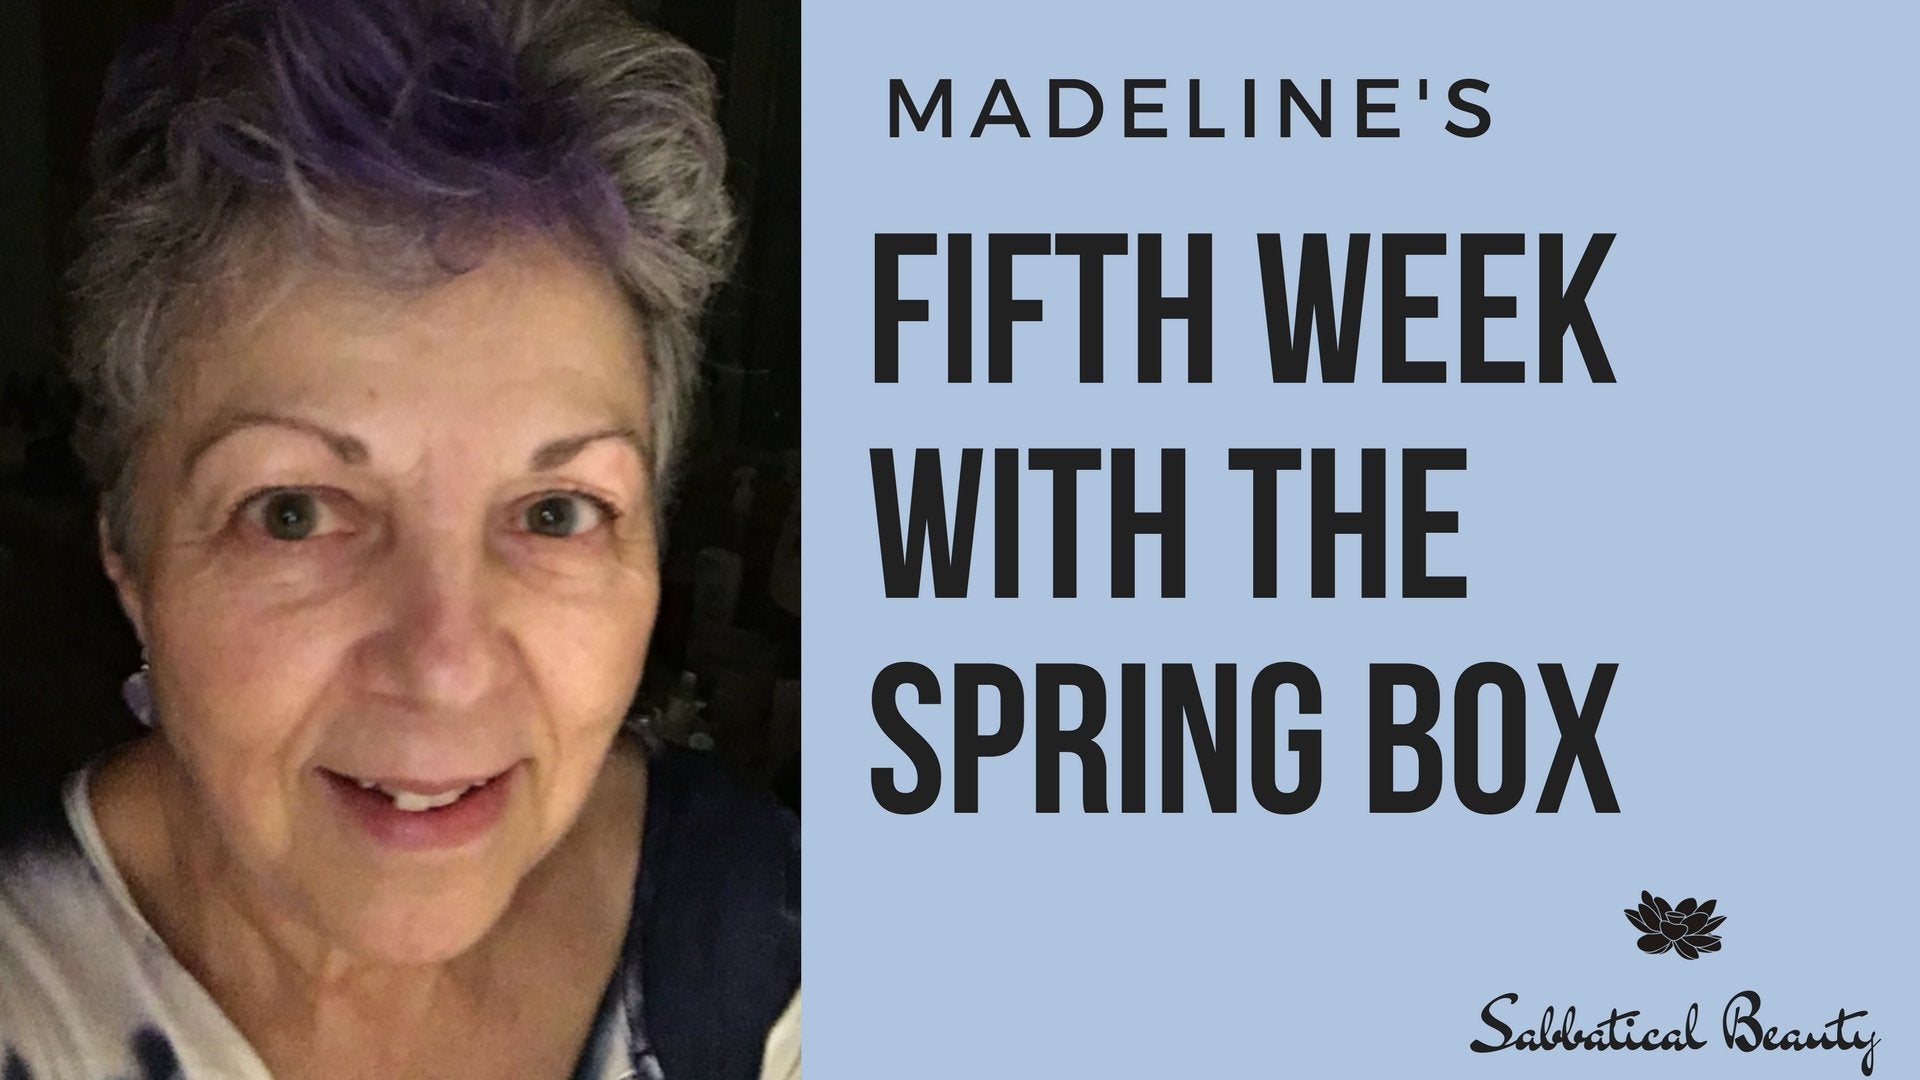 Madeline's Fifth Week With The Spring Box! - Sabbatical Beauty